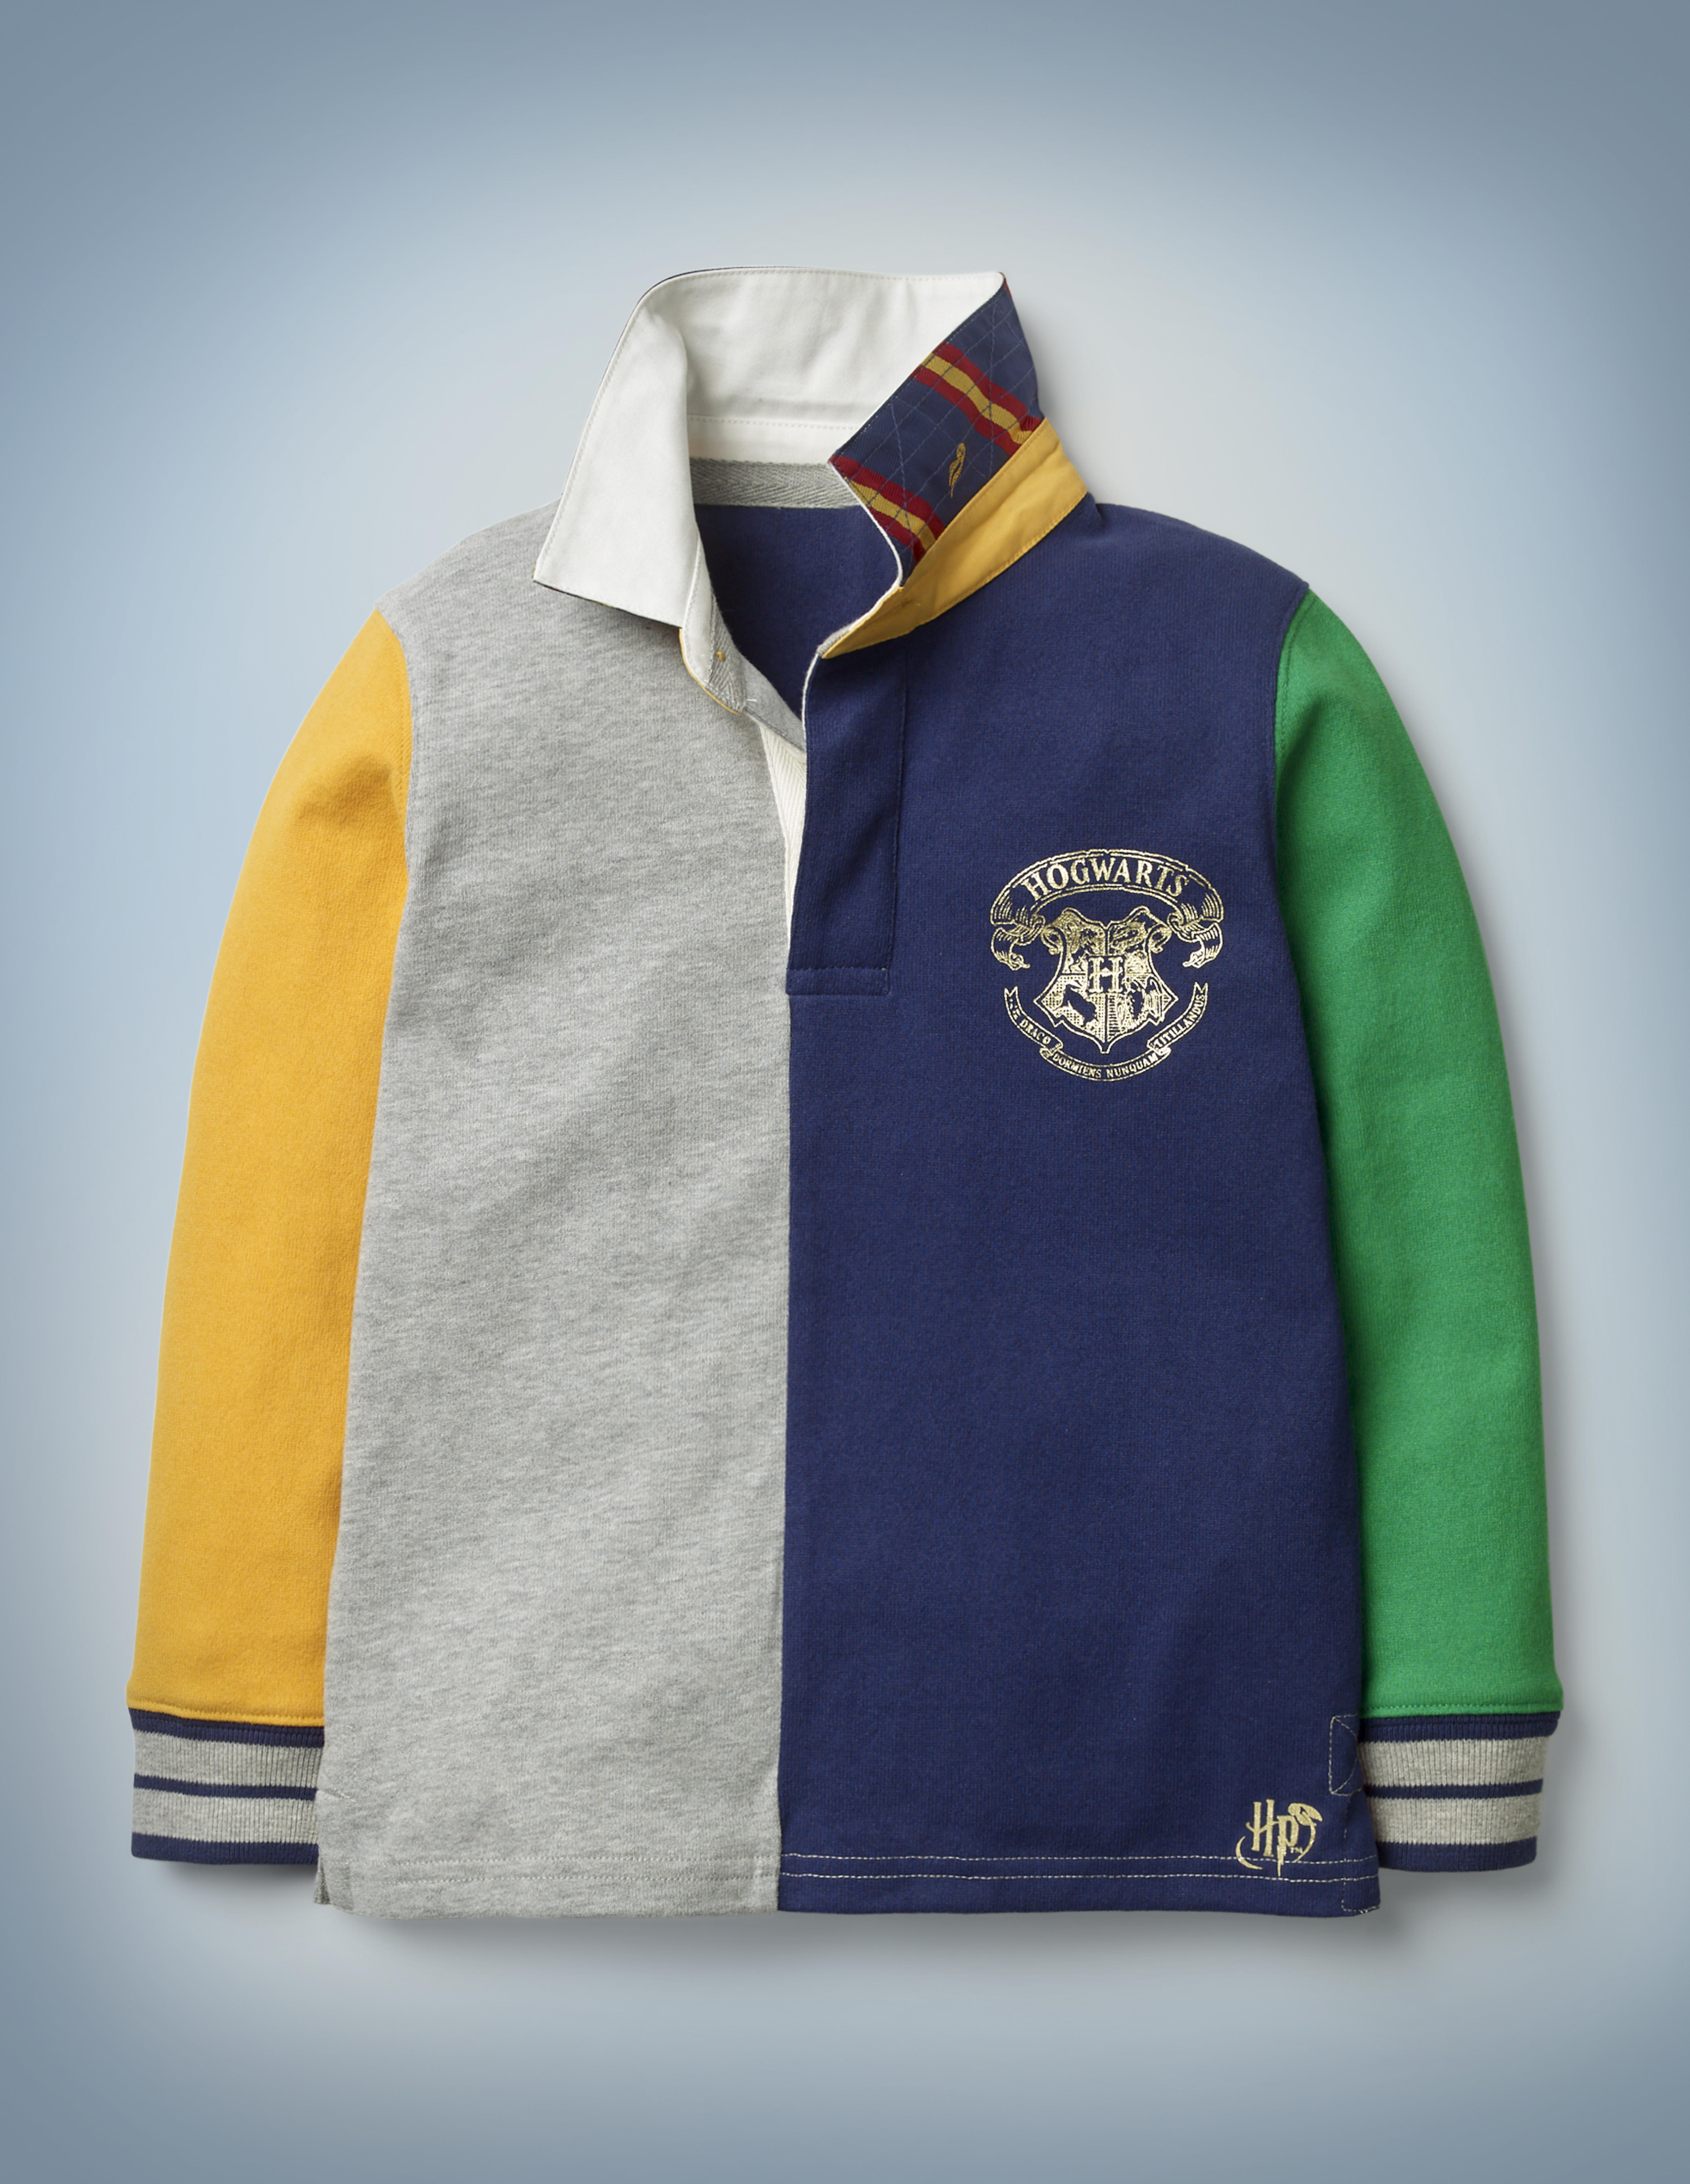 The Mini Boden Hogwarts Rugby Shirt, multi-color, has a fun patchwork feel. The shirt is collared with cuffs and features a Hogwarts crest in the front pocket area. It retails at £30.